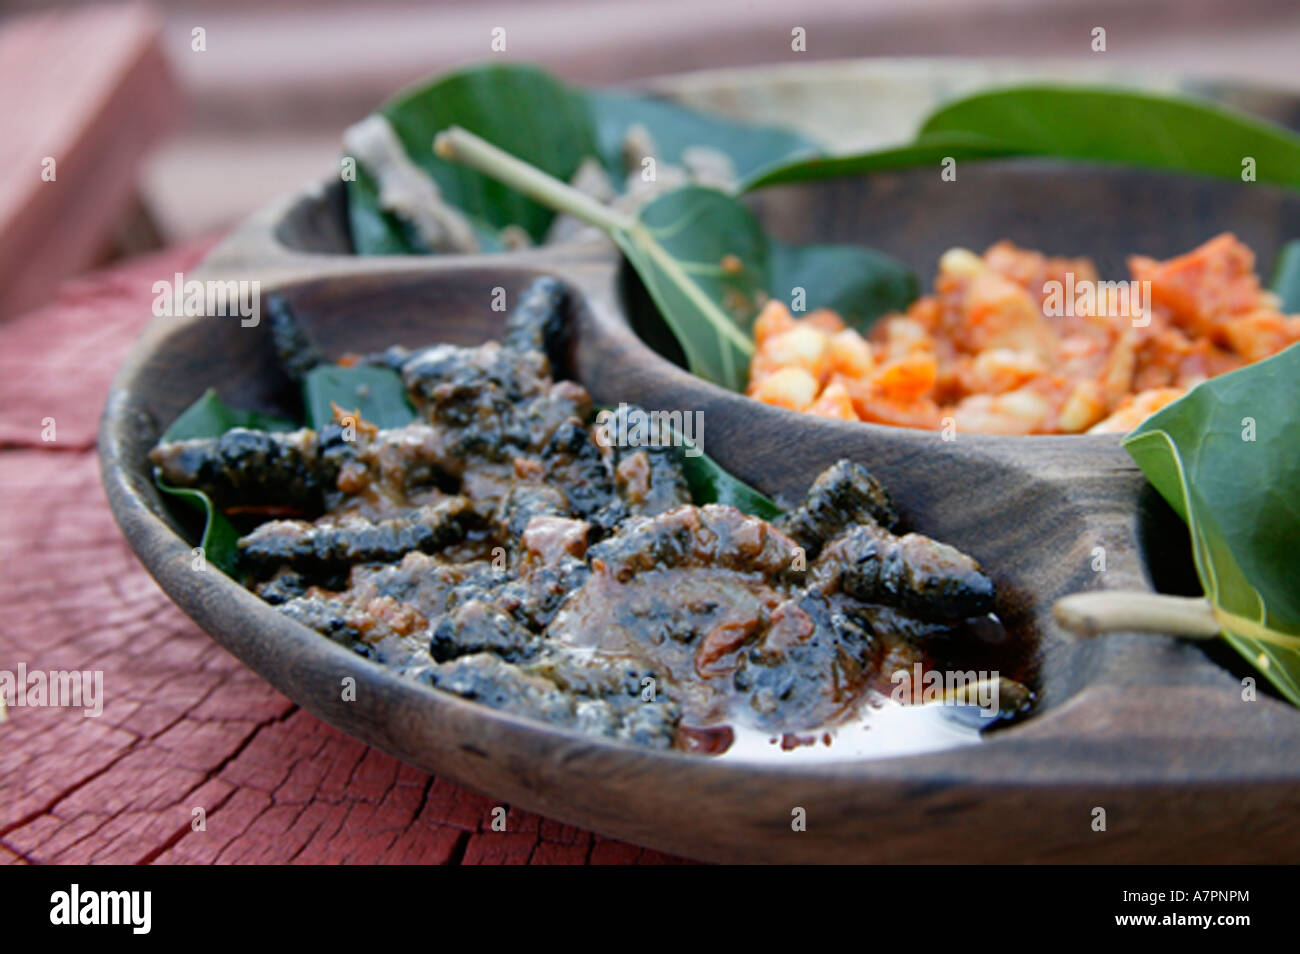 Snacks offered to tourists at the Shangana cultural village - platter includes roasted mopane worms on the left and crocodile Stock Photo